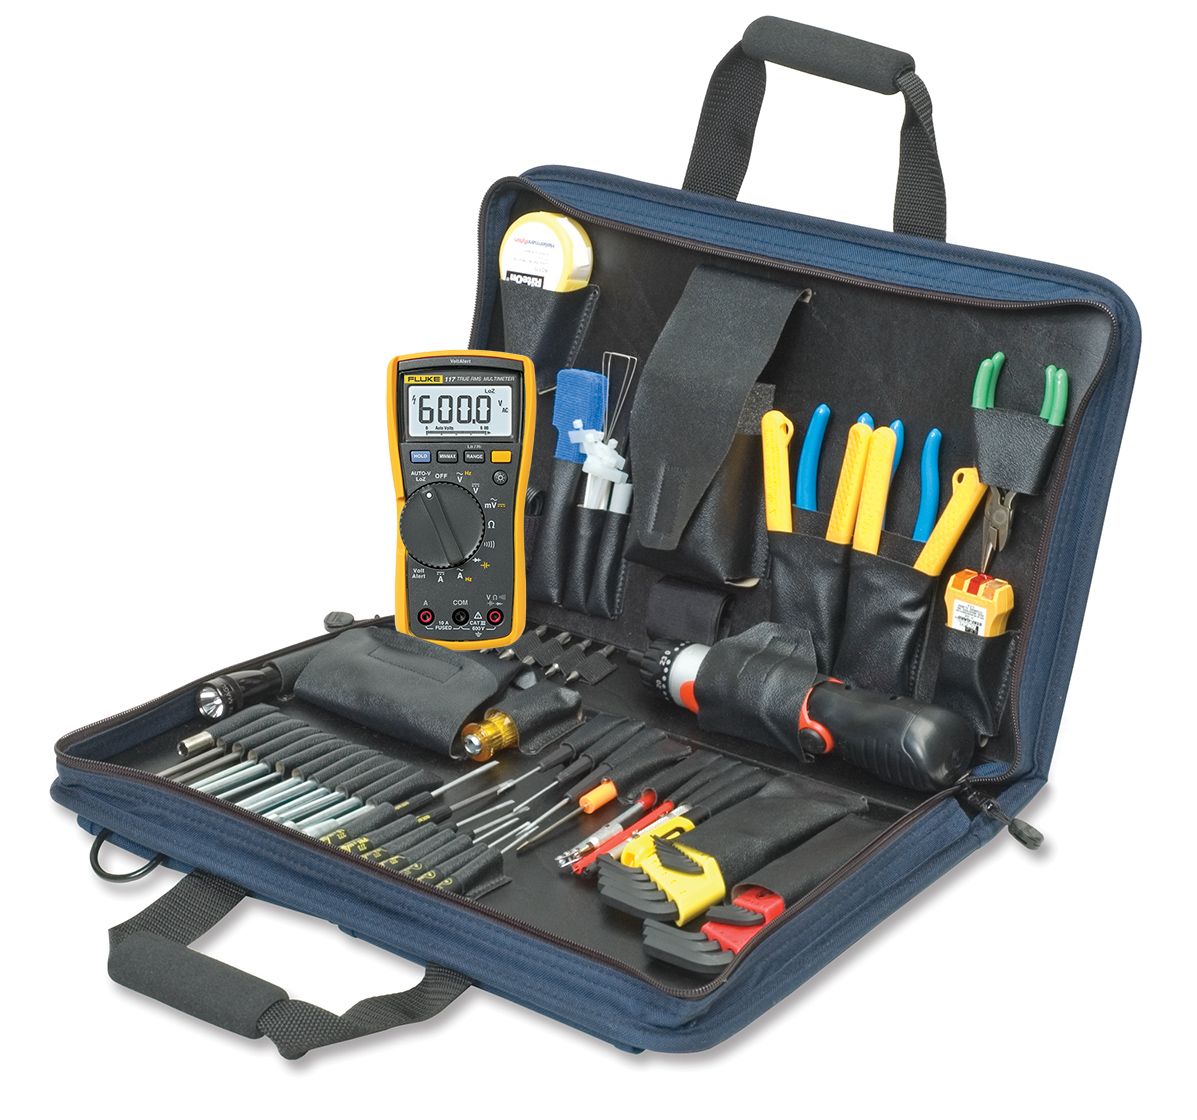 Kit Complet Pour Microsoudure - Kits Outils - The Repair Academy Store